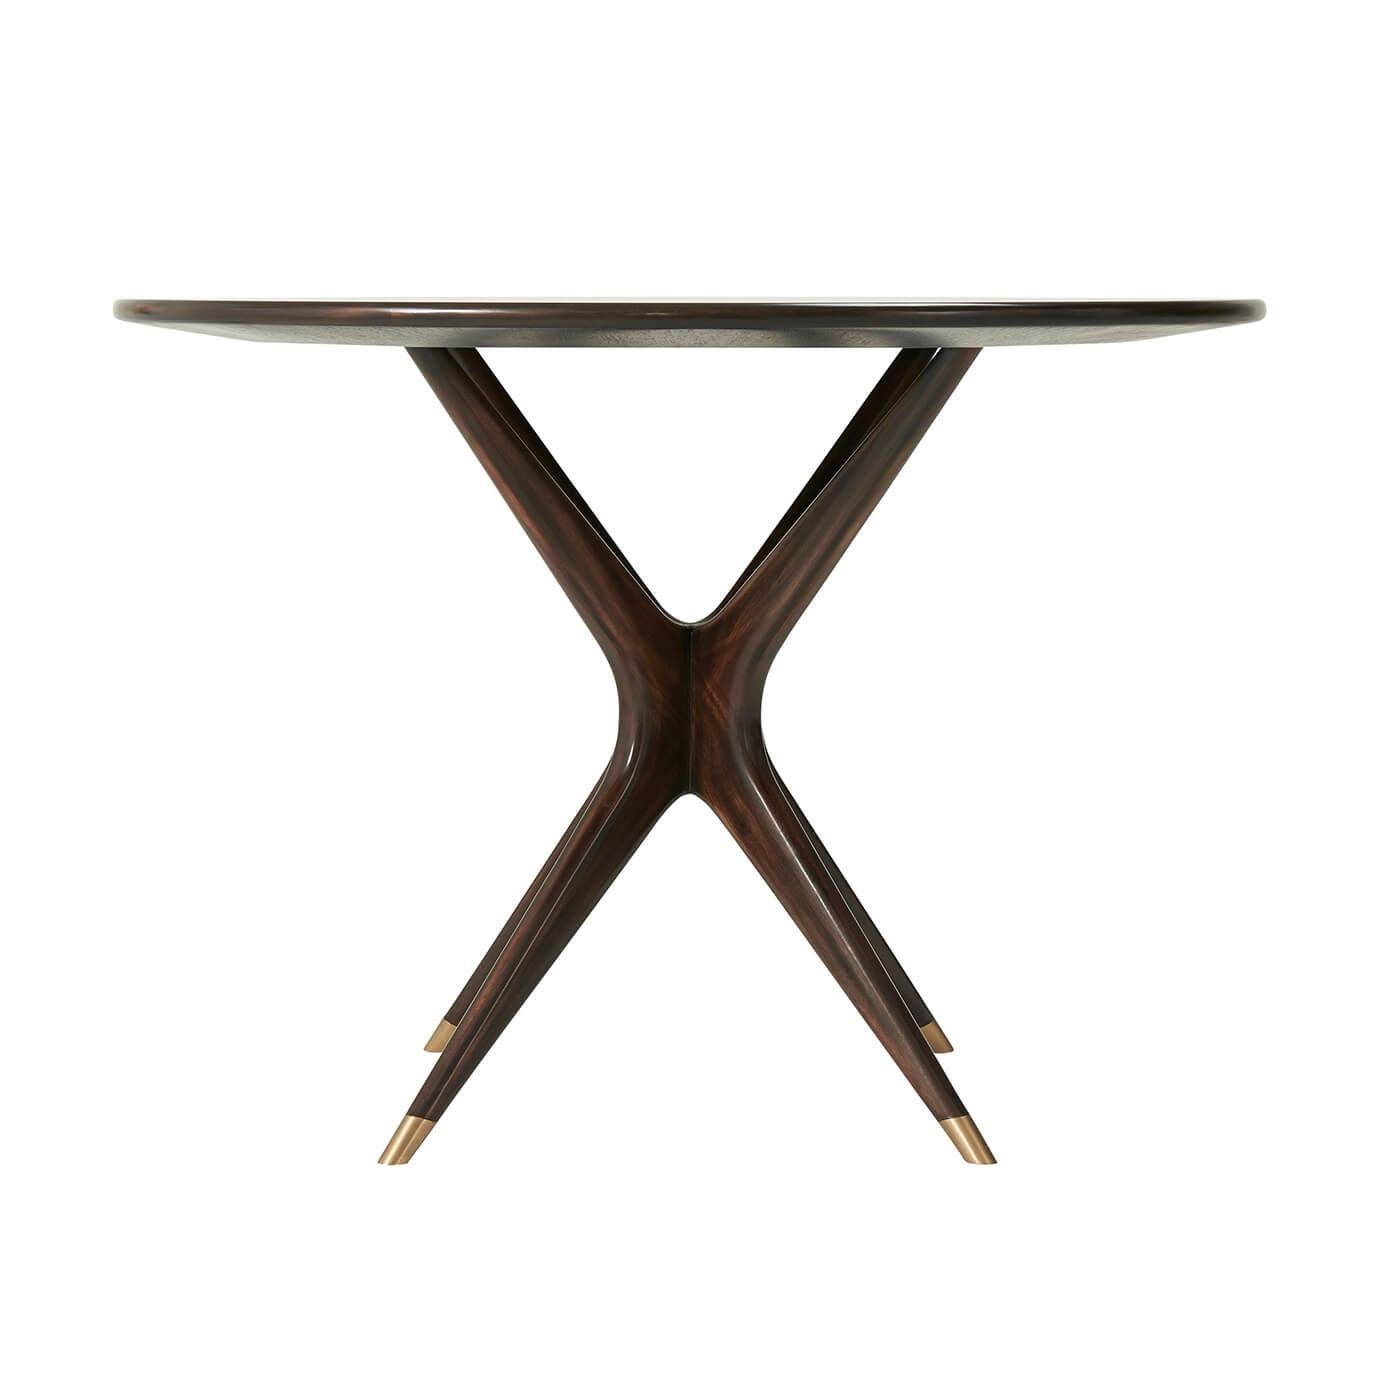 This magnificent Mid Century center table is the epitome of refined elegance and sophistication. The stunning Amara ebony veneer, combined with the rich ebonized mahogany and brass accents, creates a captivating contrast that will elevate any